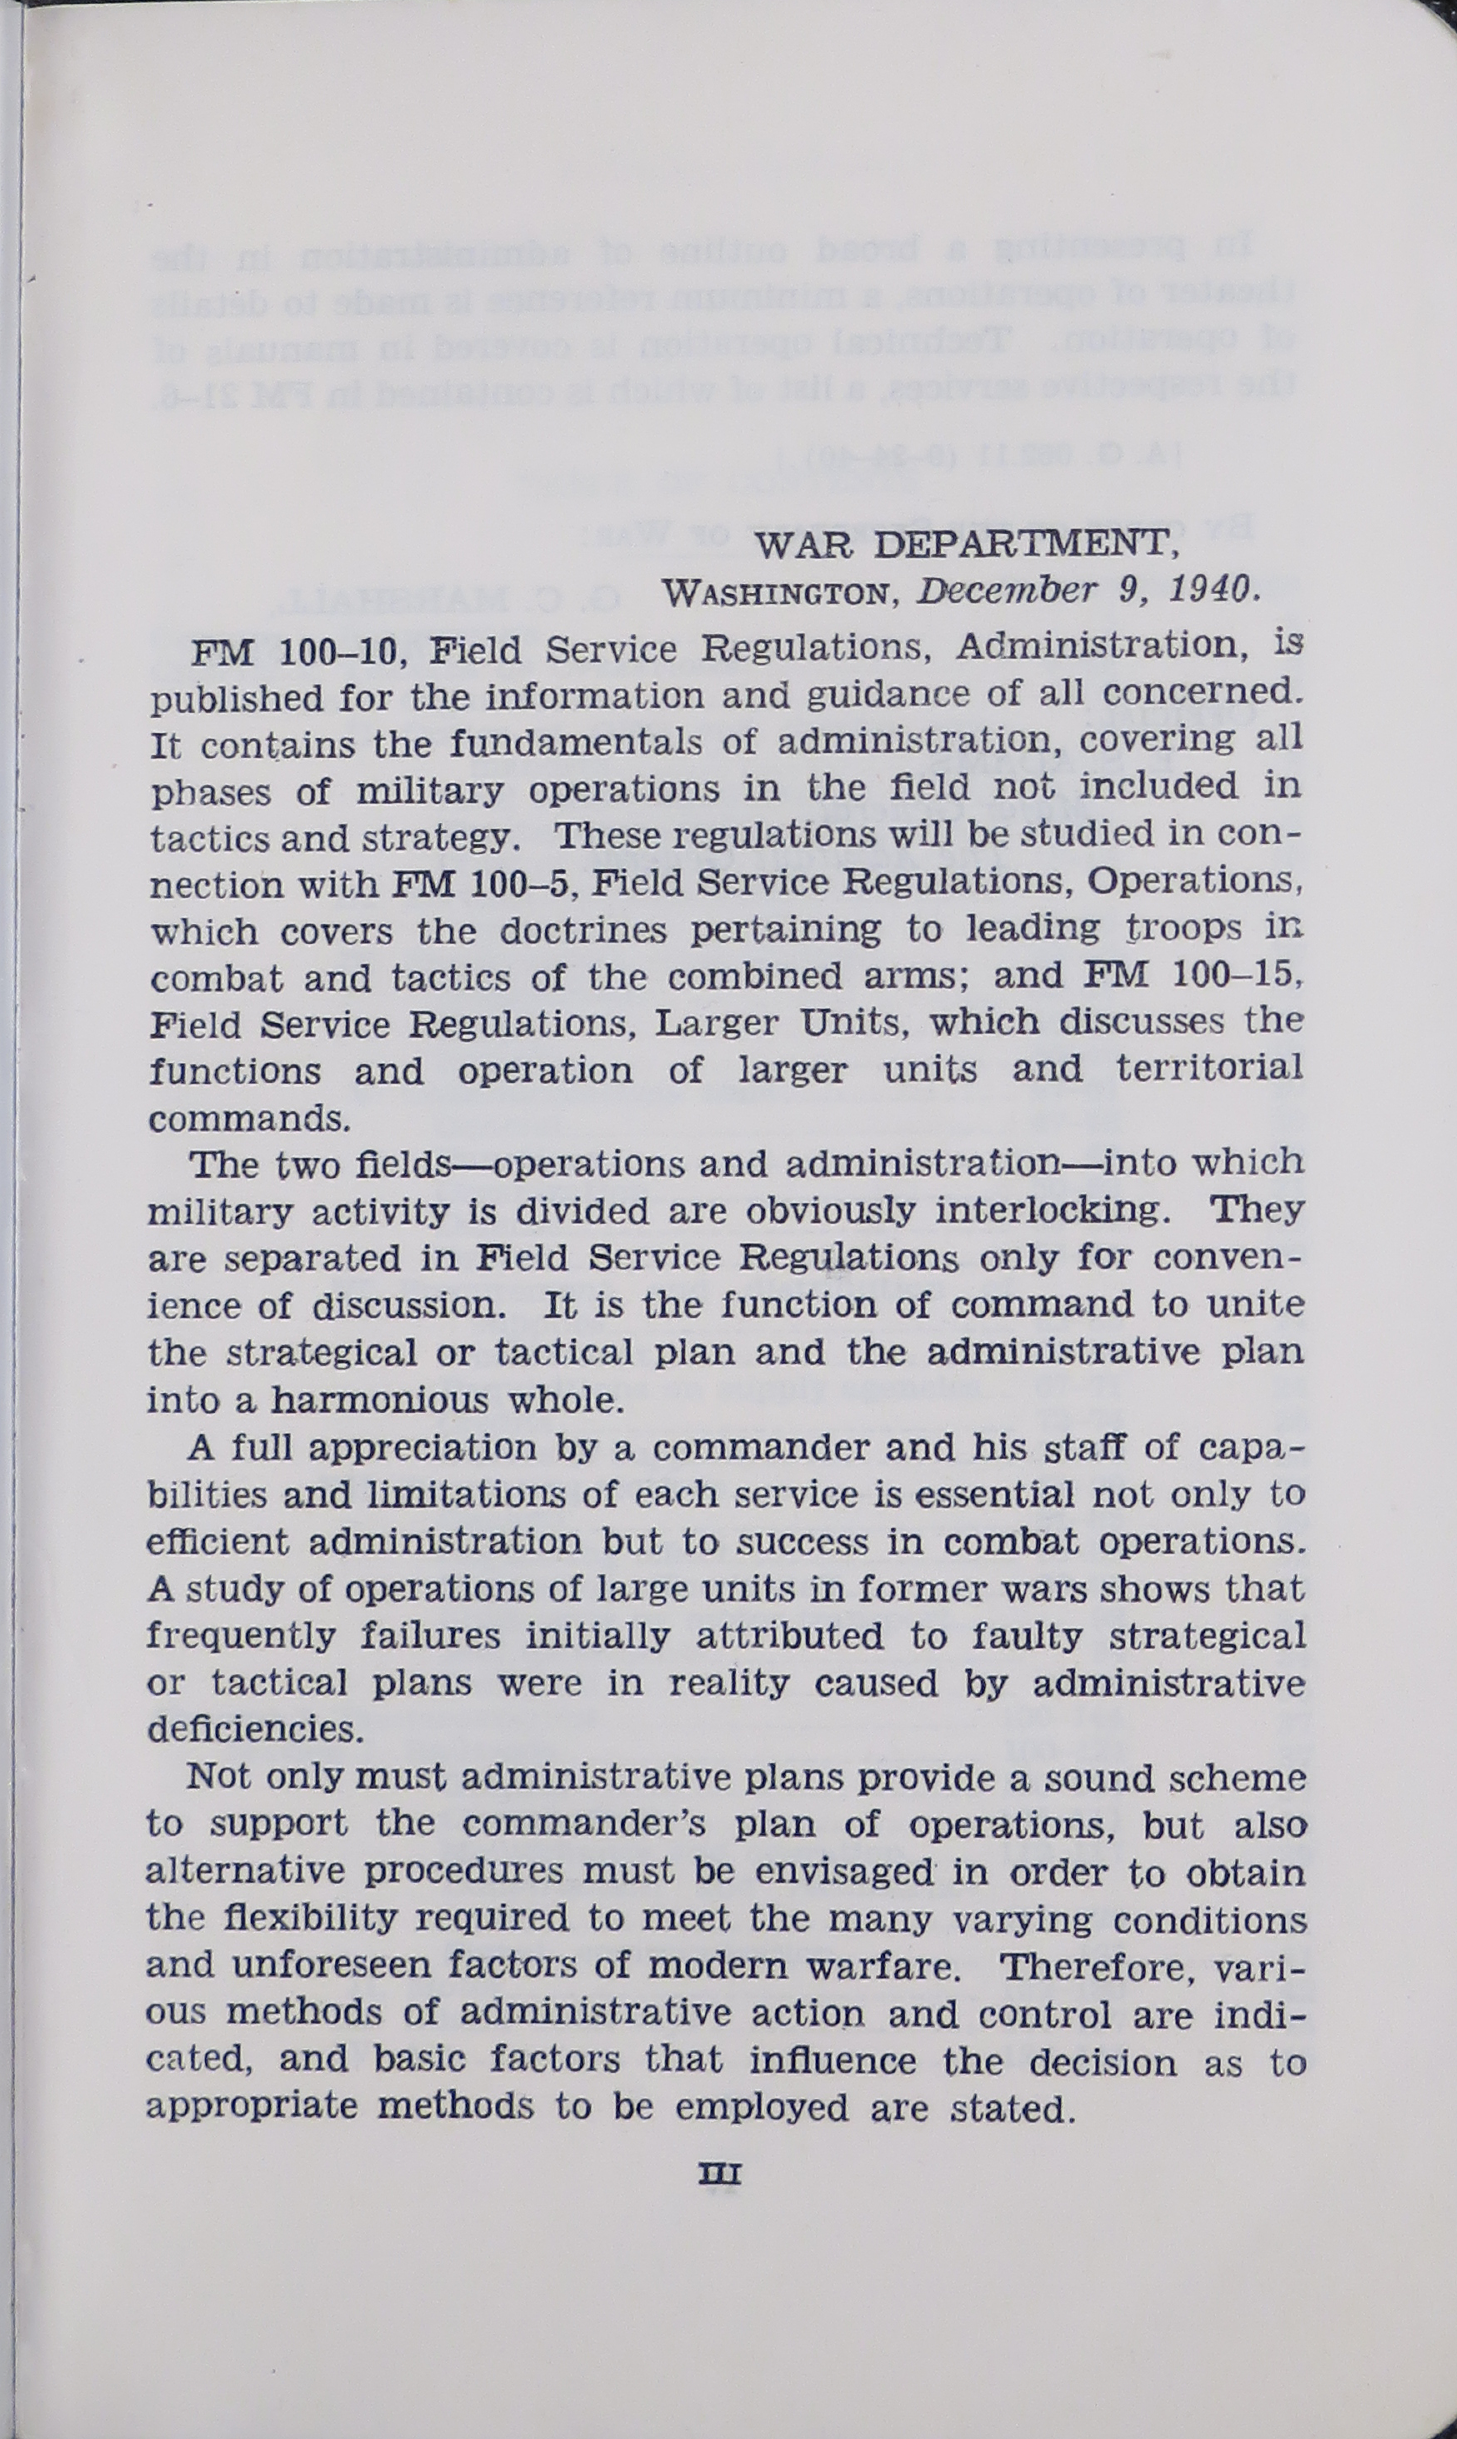 Sample page 5 from AirCorps Library document: Field Service Regulations for Administration